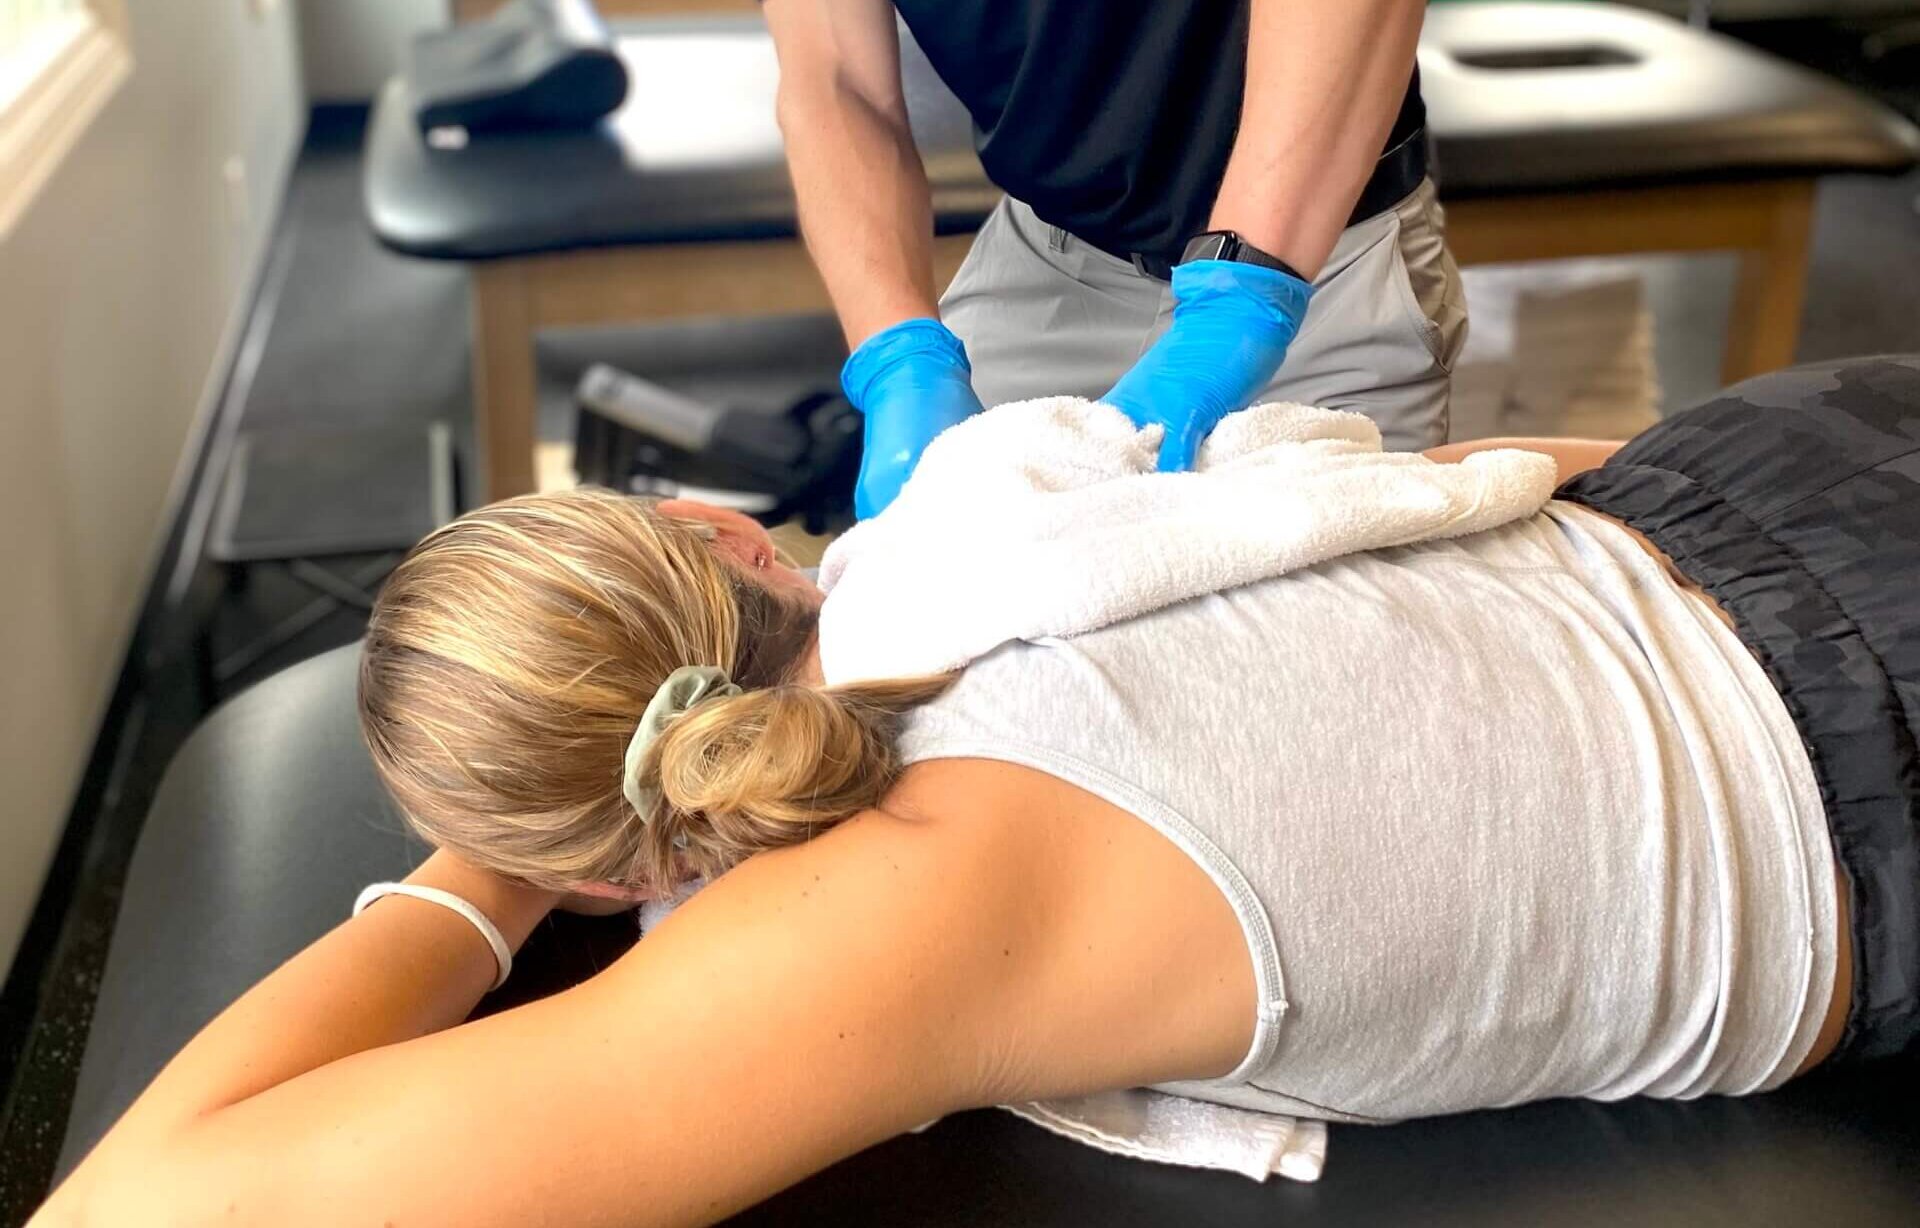 https://proclinix.com/wp-content/uploads/2023/08/ProClinix-Sports-Physical-Therapy-Chiropractic-Dr-Stephen-Grunbok-PT-DPT-providing-soft-tissue-work-to-this-patients-shoulder-scaled-e1692718501914.jpg